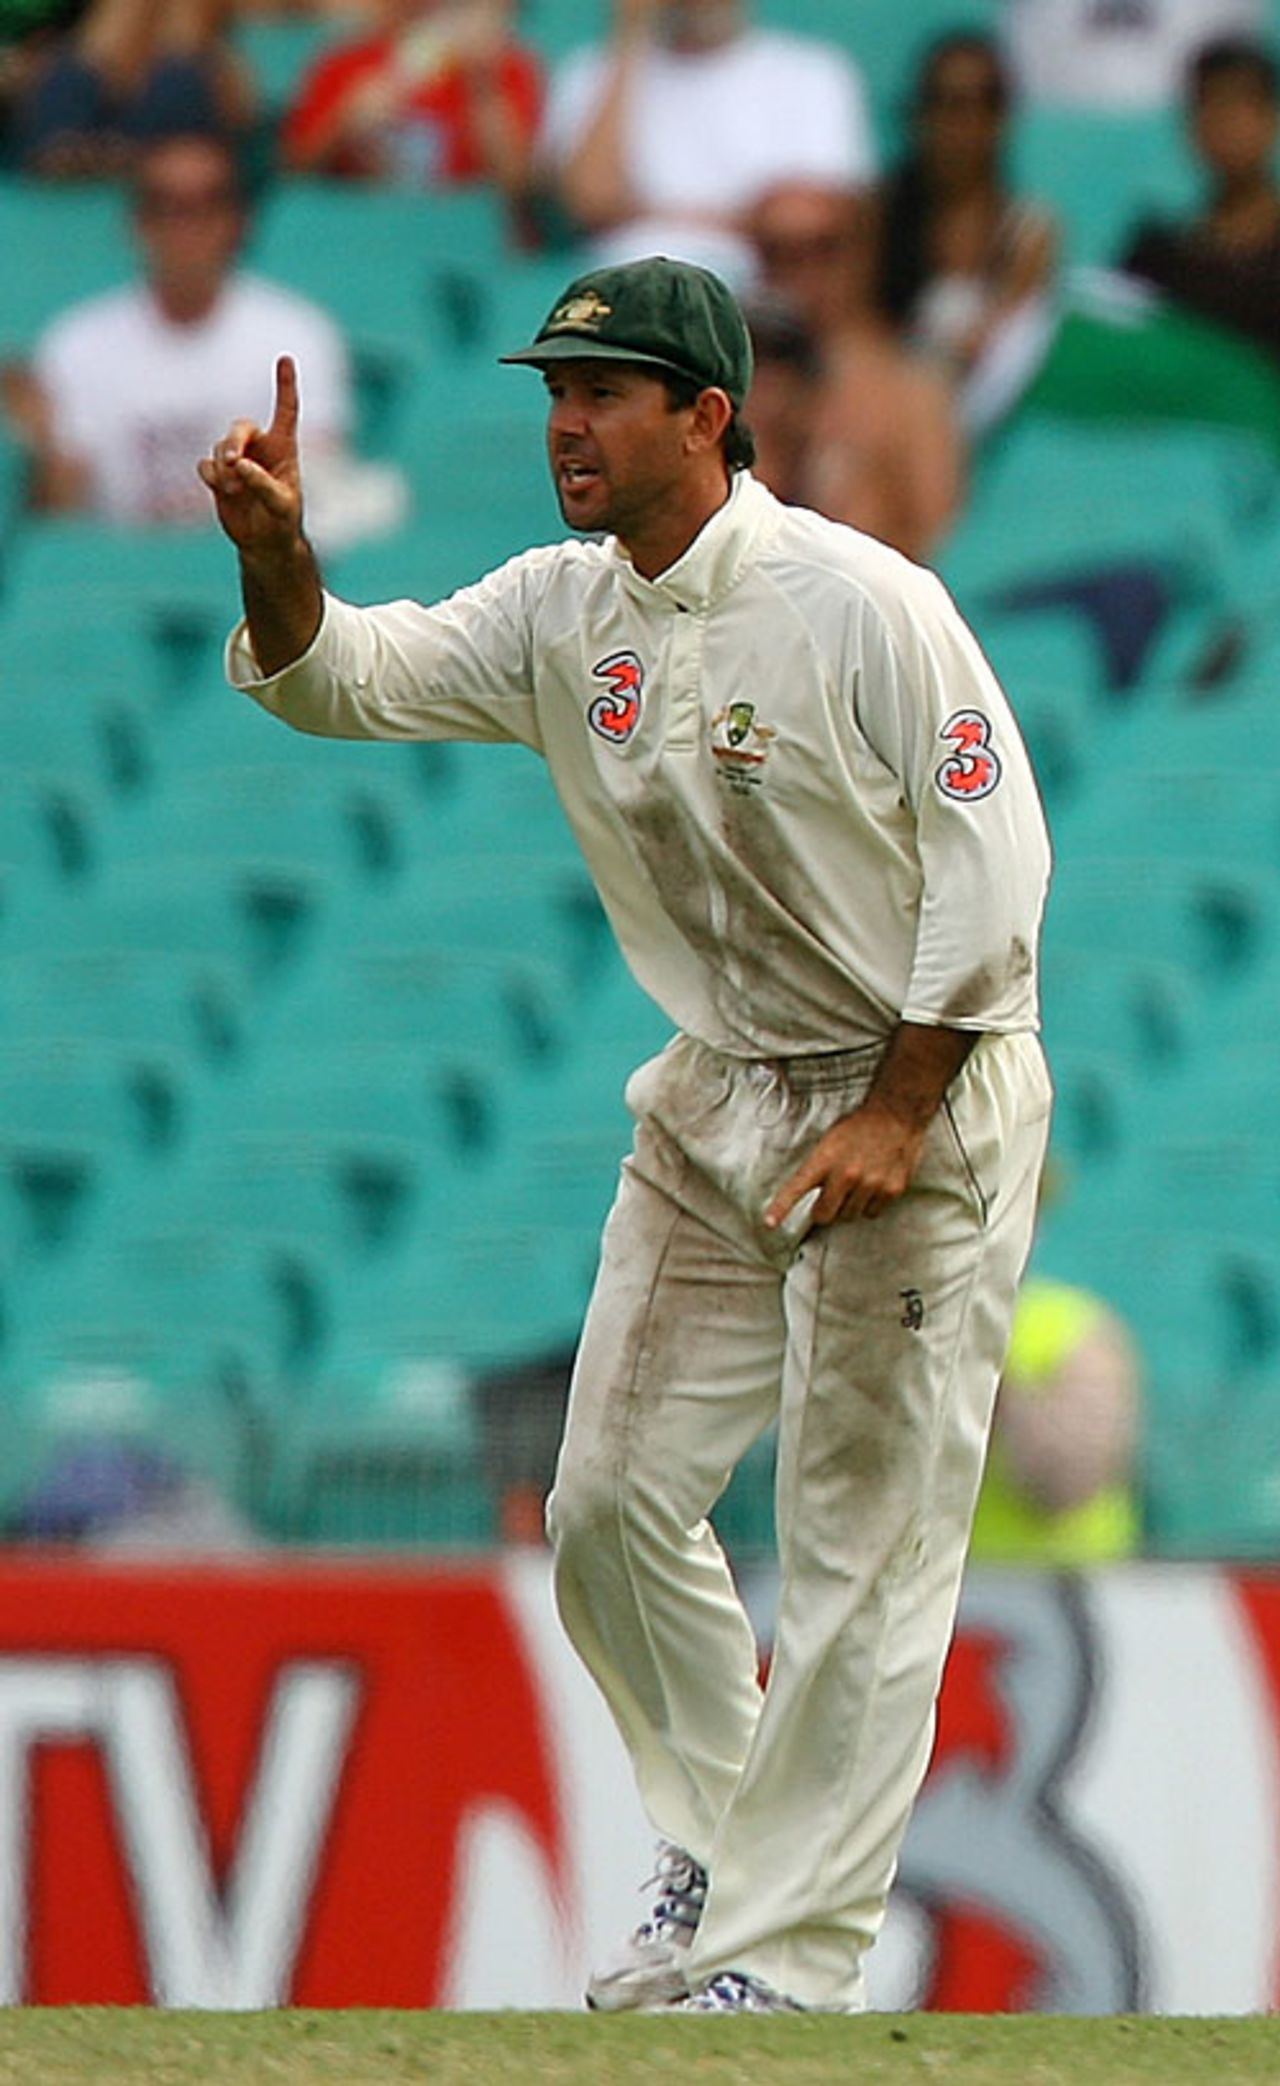 Ricky Ponting tells the umpire that Sourav Ganguly was caught cleanly, Australia v India, 2nd Test, Sydney, 5th day, January 6, 2008